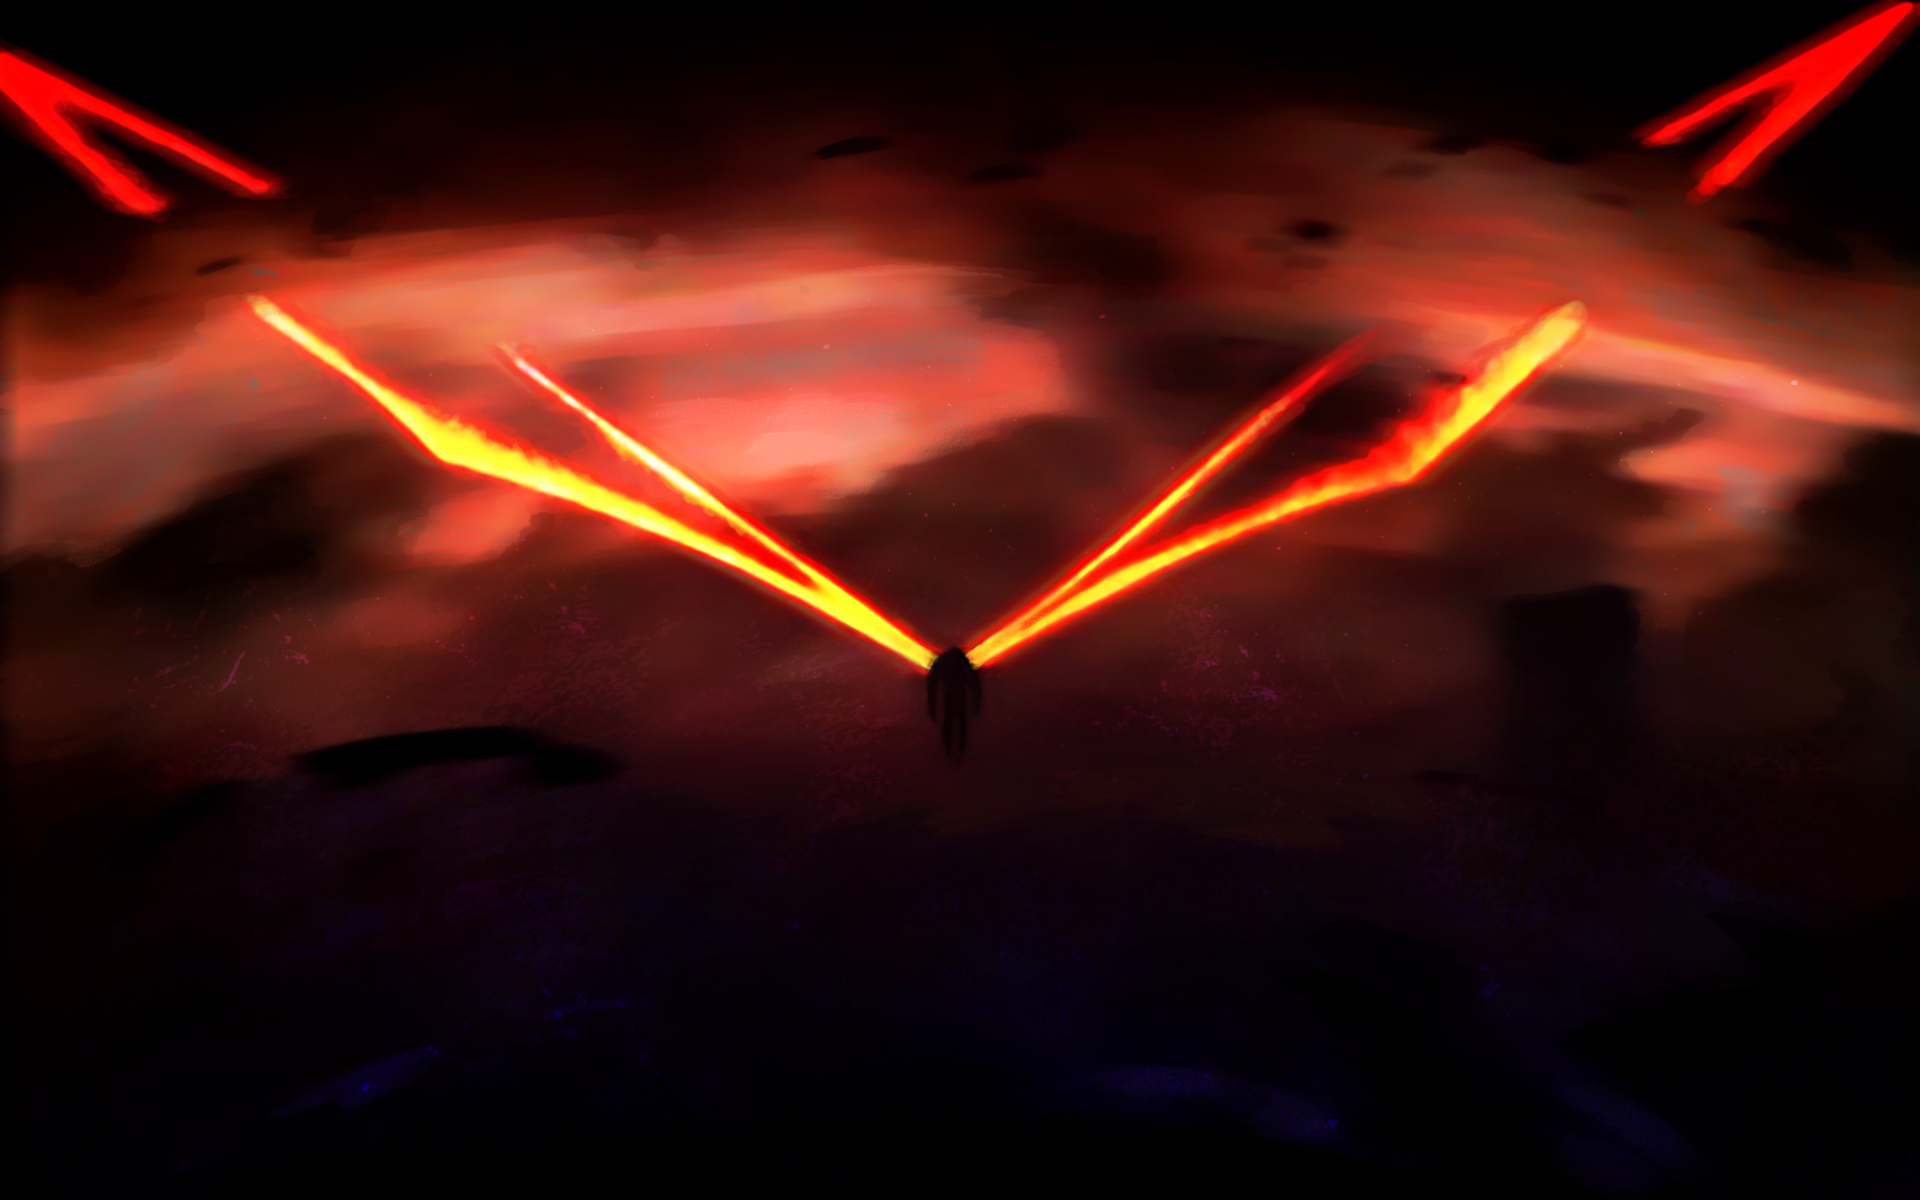 Anime End of Evangelion HD Wallpaper | Background Image